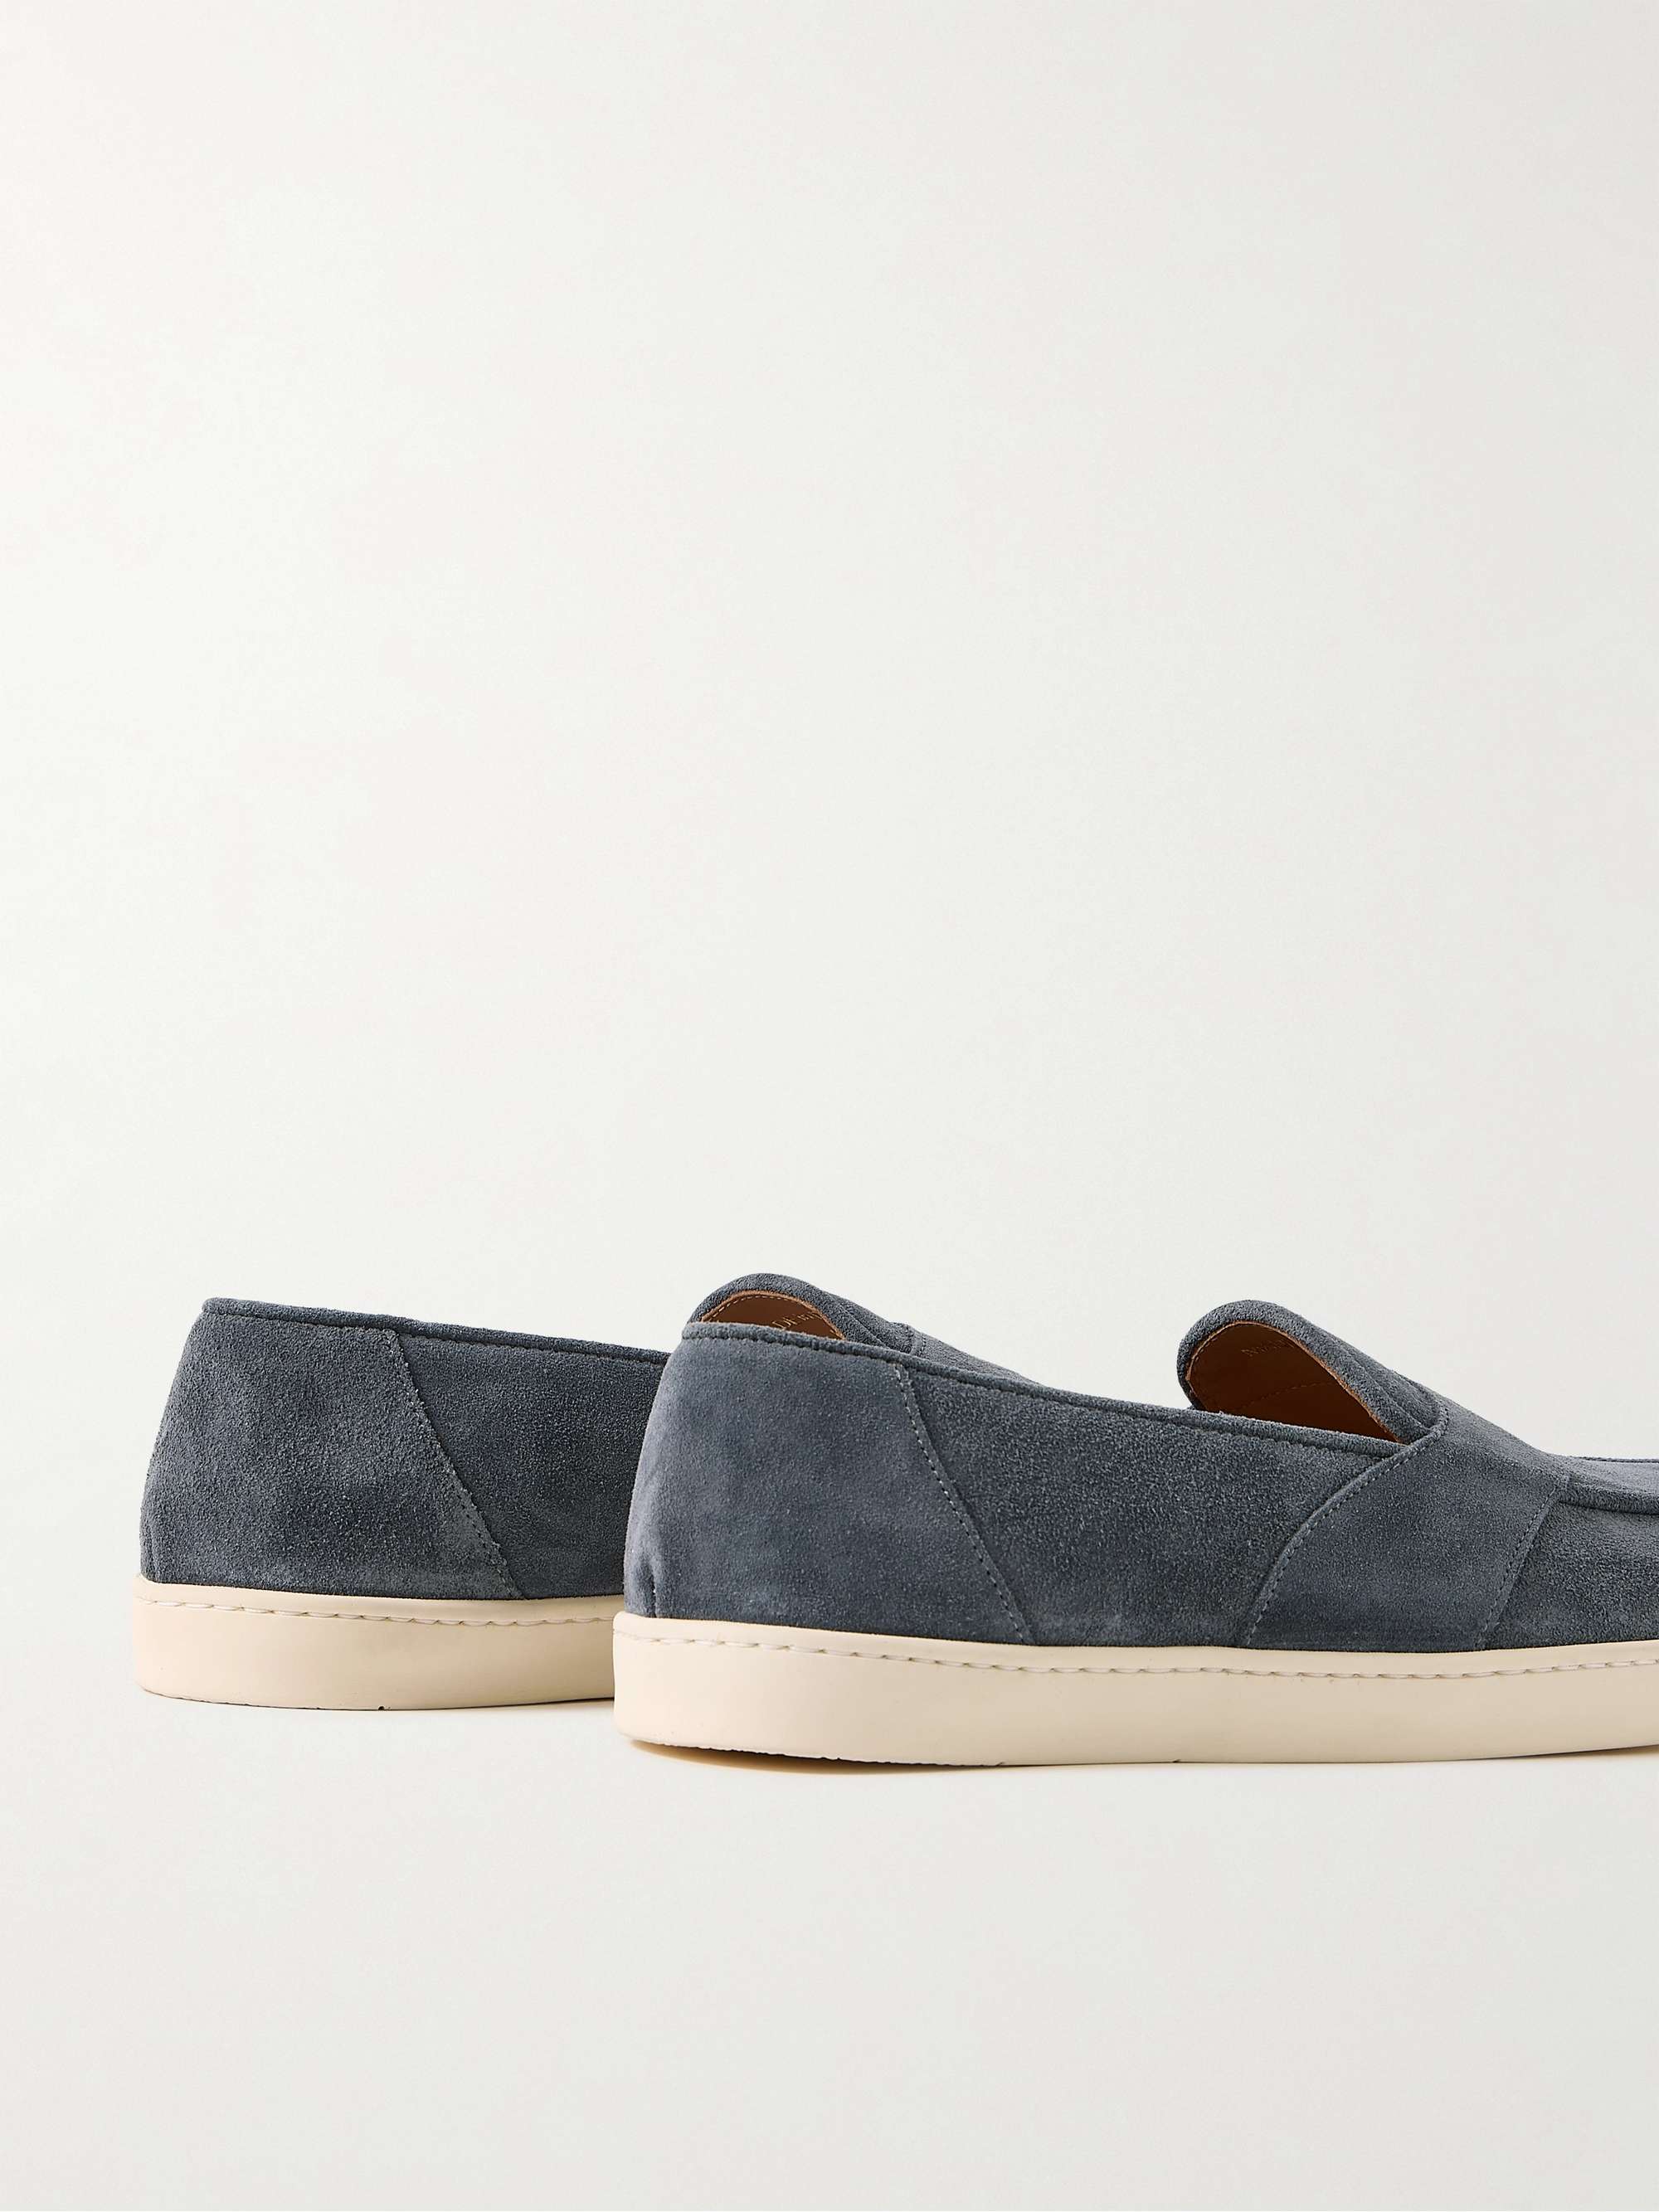 GEORGE CLEVERLEY Joey Suede Penny Loafers for Men | MR PORTER